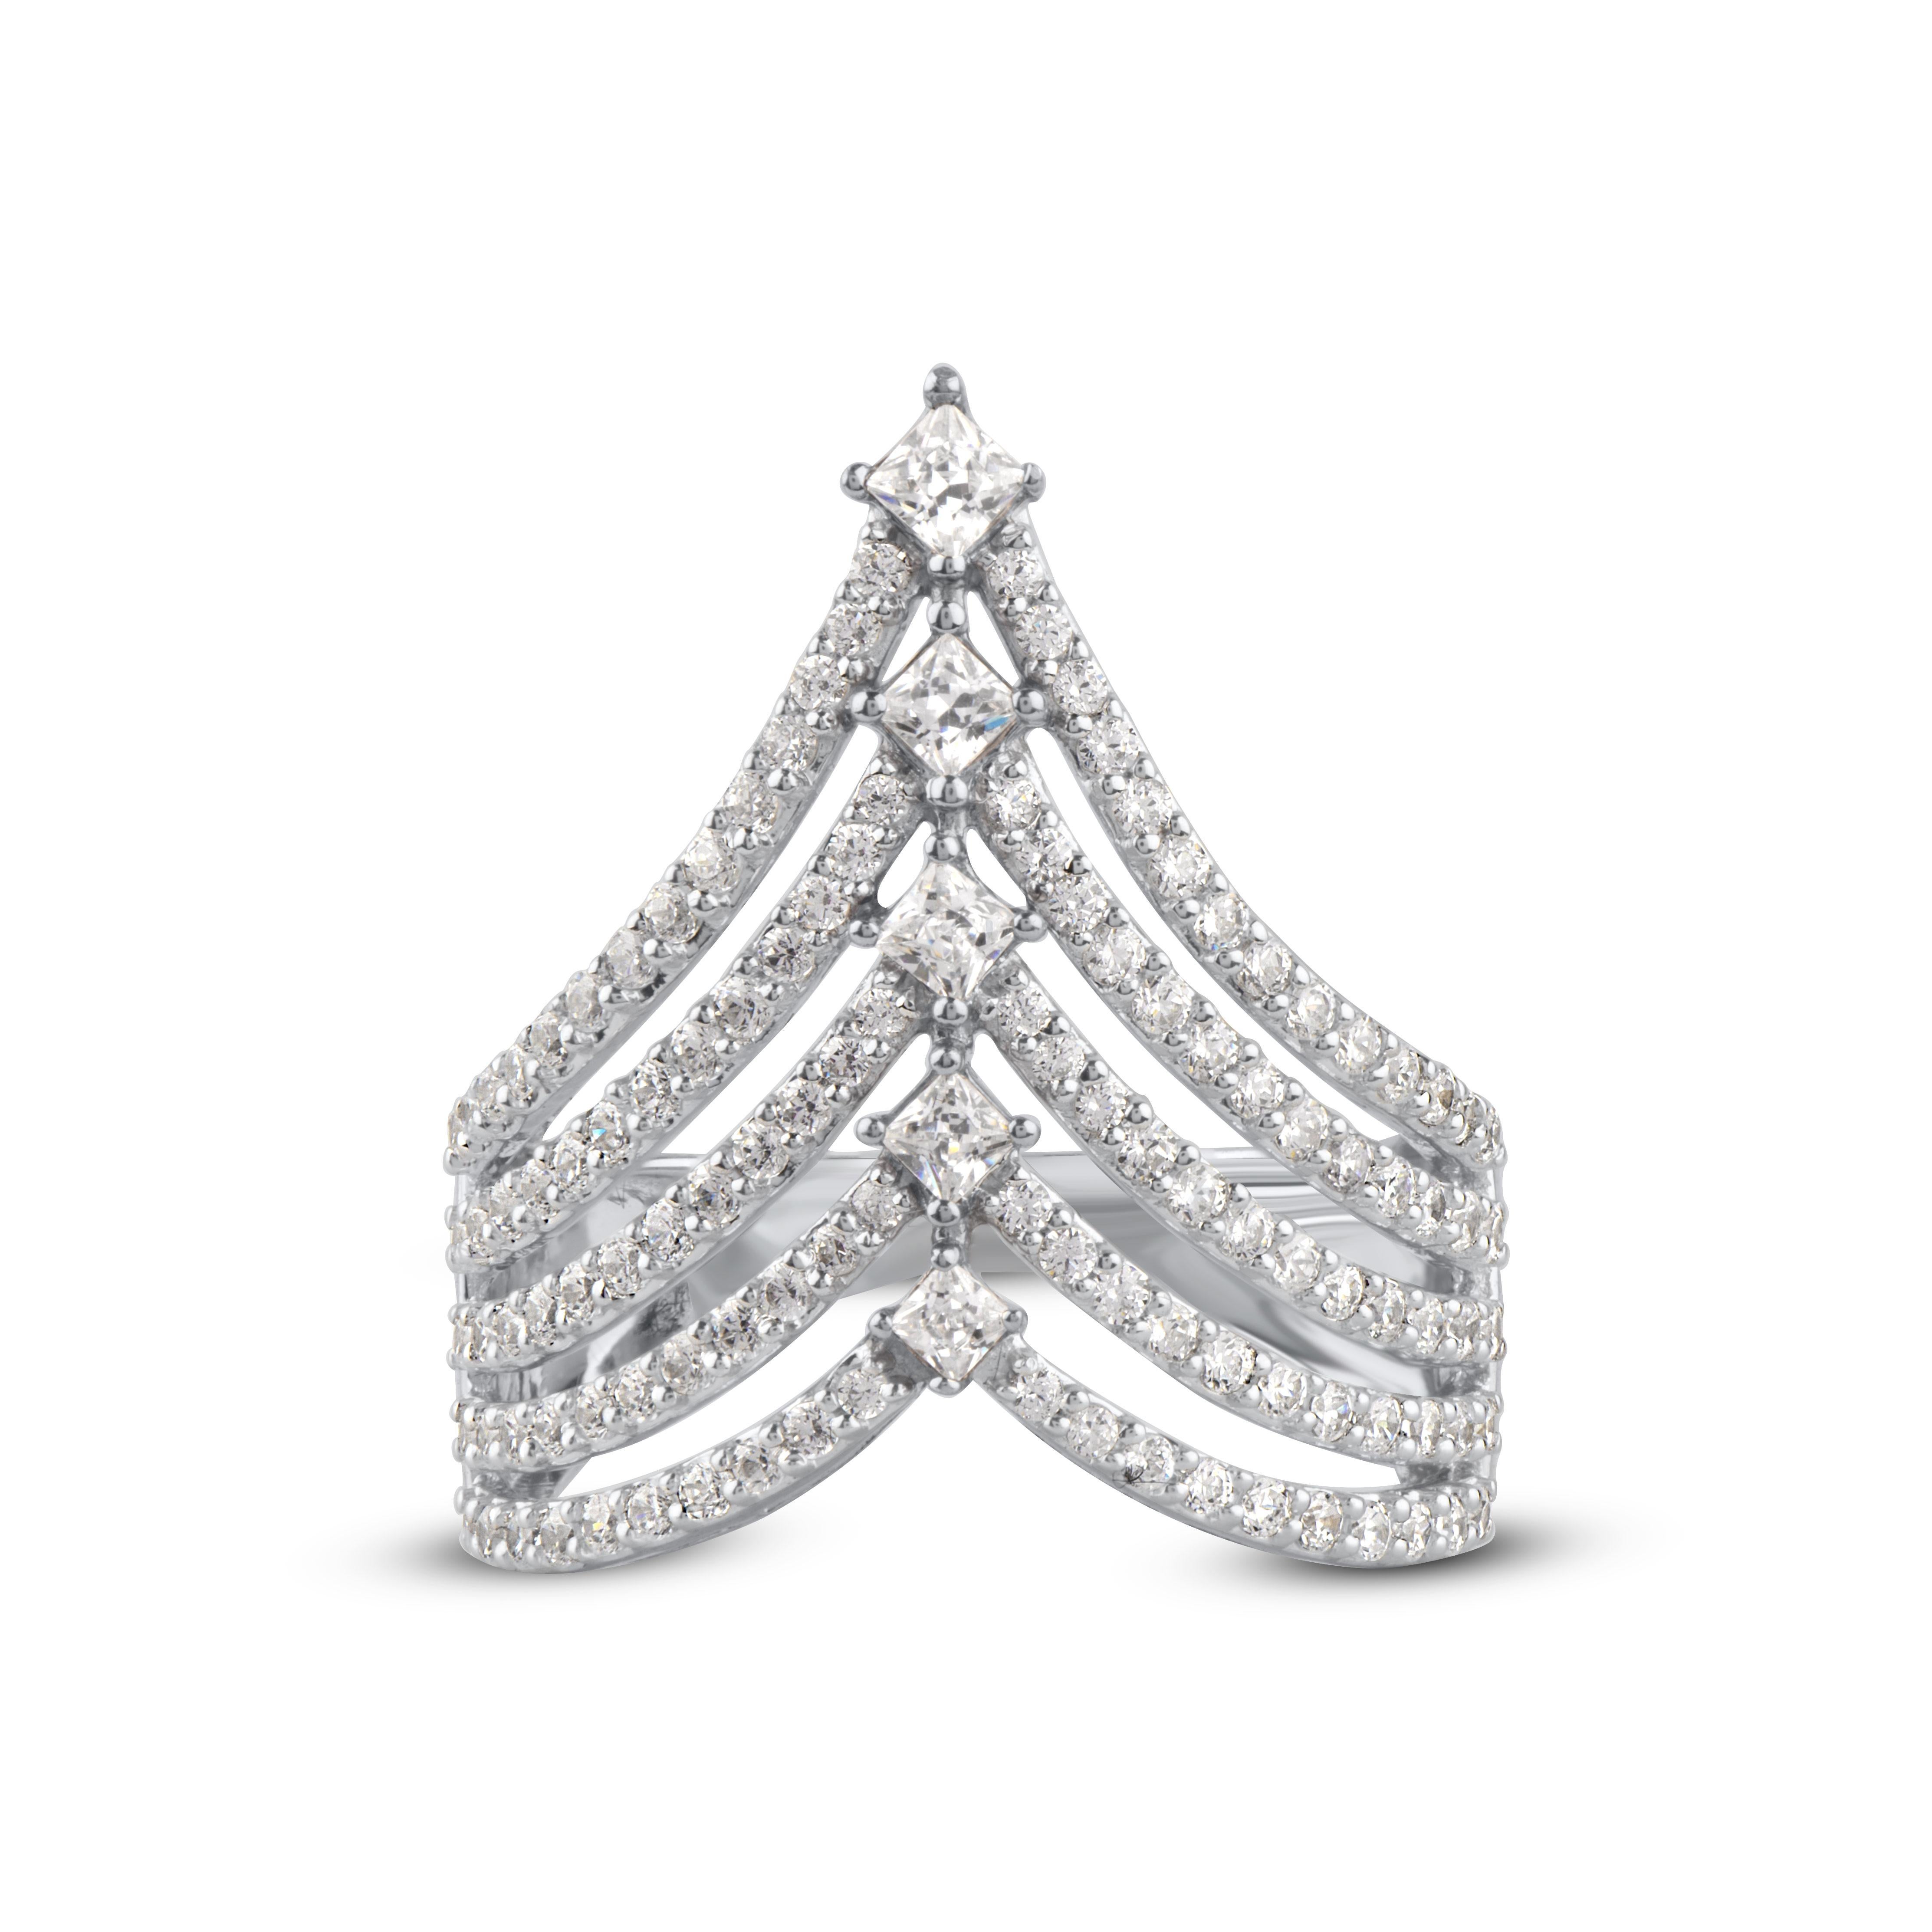 Treat your princess with this dazzling diamond multi-row diamond tiara ring that perfectly fits her style. The ring is crafted by our inhouse experts in 14 karat white gold and studded with 120 brilliant round and 5 princess-cut diamond set in prong